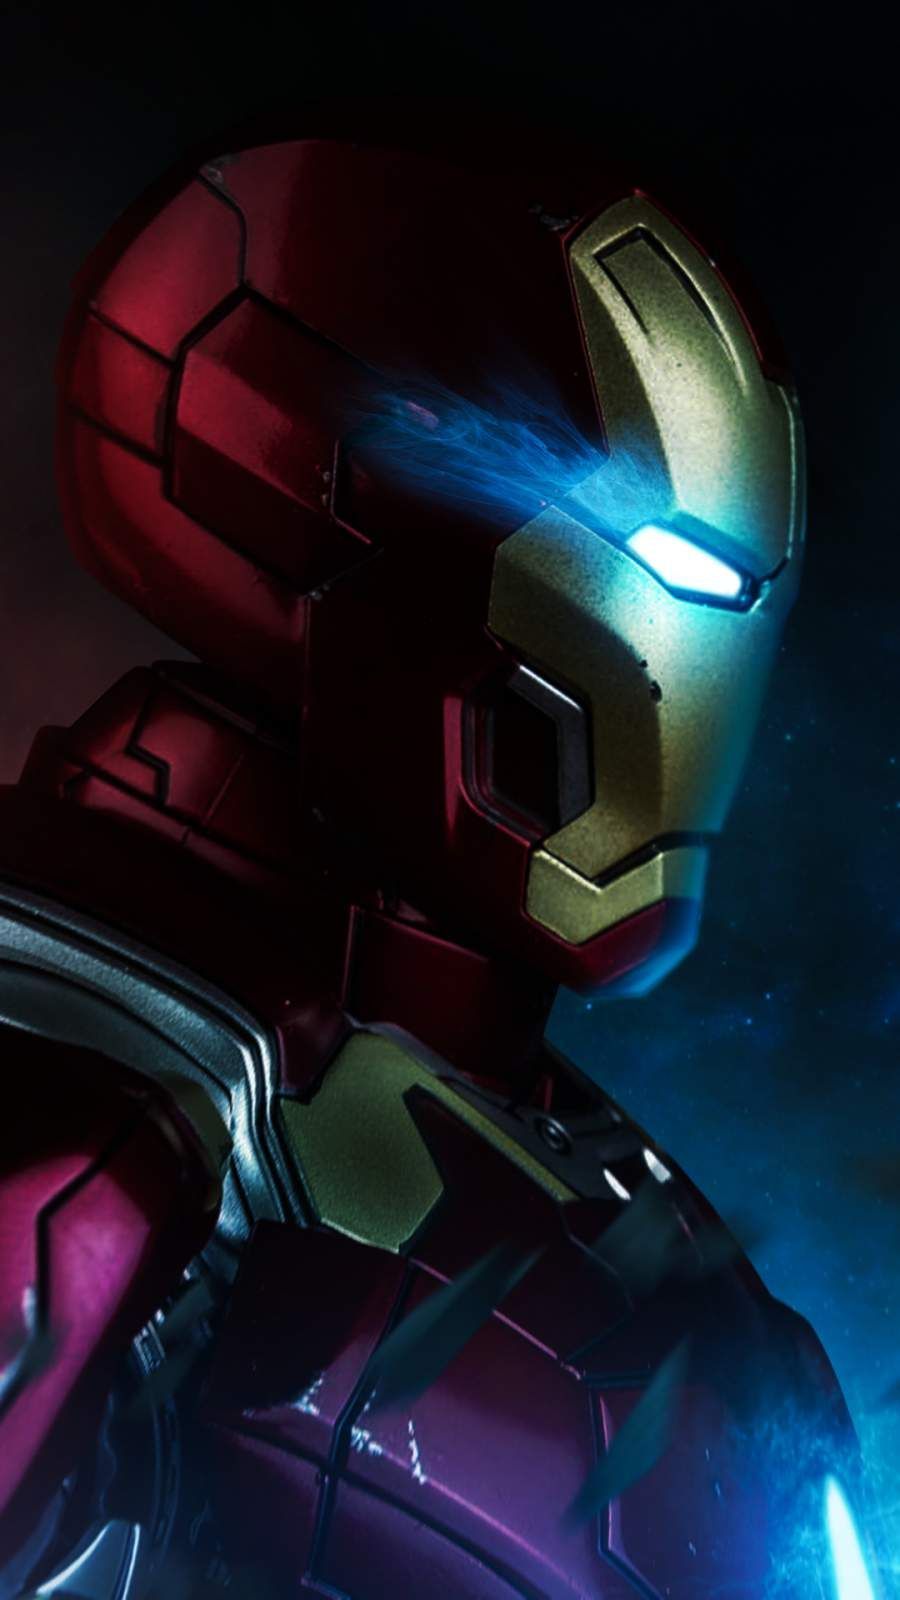 Get New Background For IPhone 11 IPhone 11 Pro 11 Pro Max Today. Iron Man Wallpaper, Iron Man Art, Iron Man